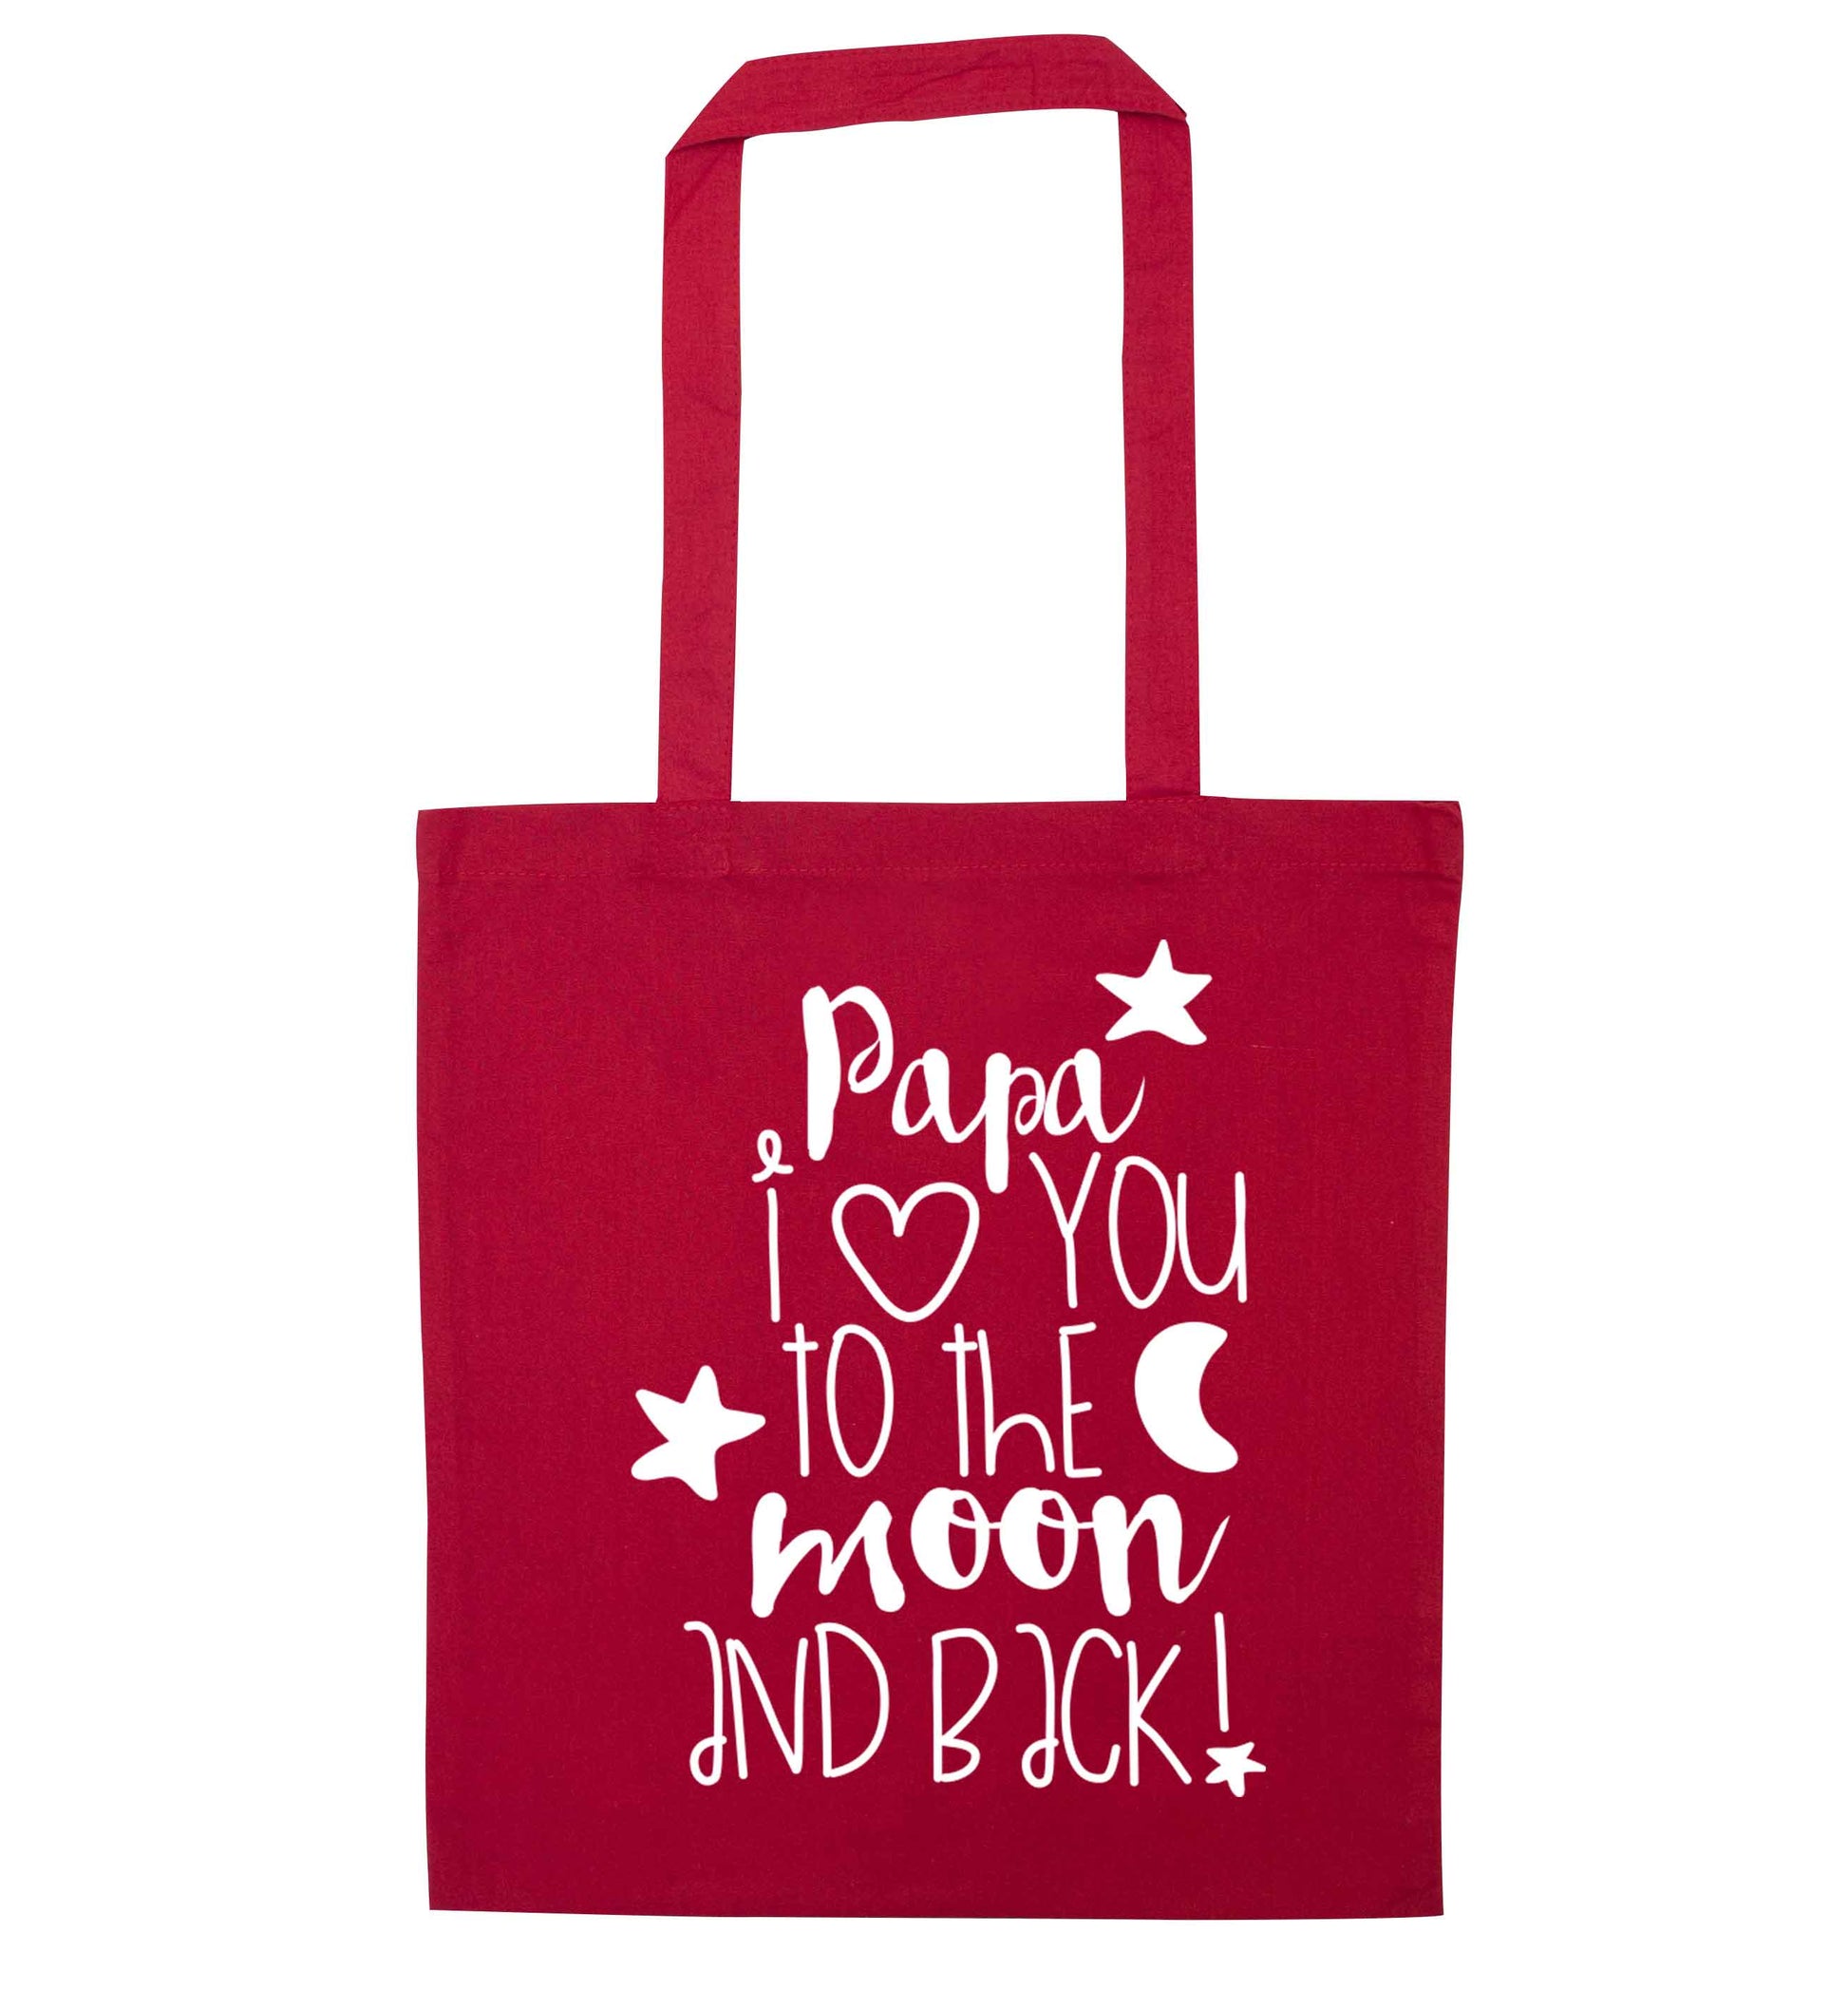 Papa I love you to the moon and back red tote bag